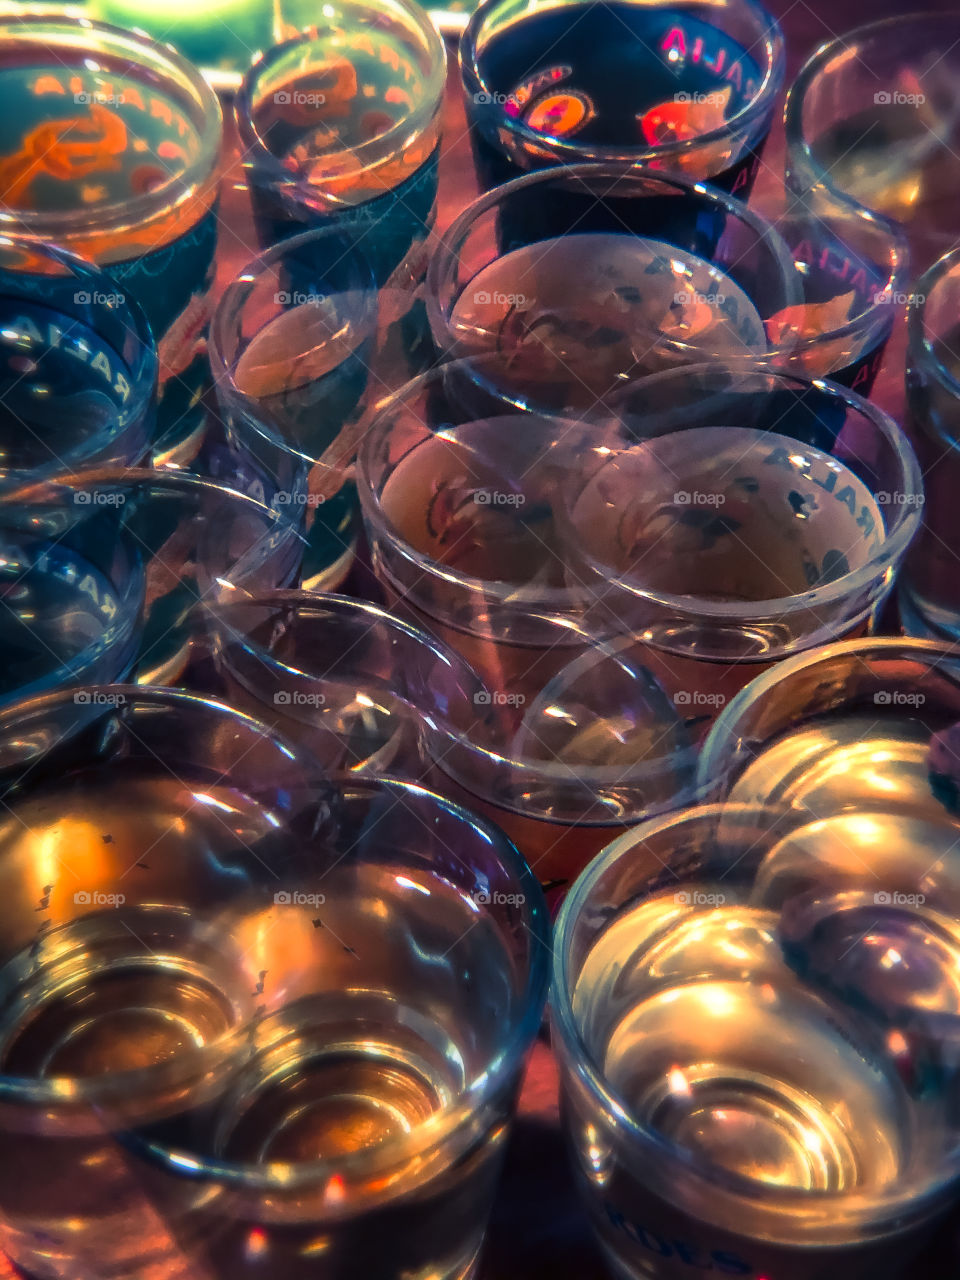 Seeing double in a drunken sense, a view of many drinks glasses taken through a kaleidoscopic lens giving a double vision appearance 